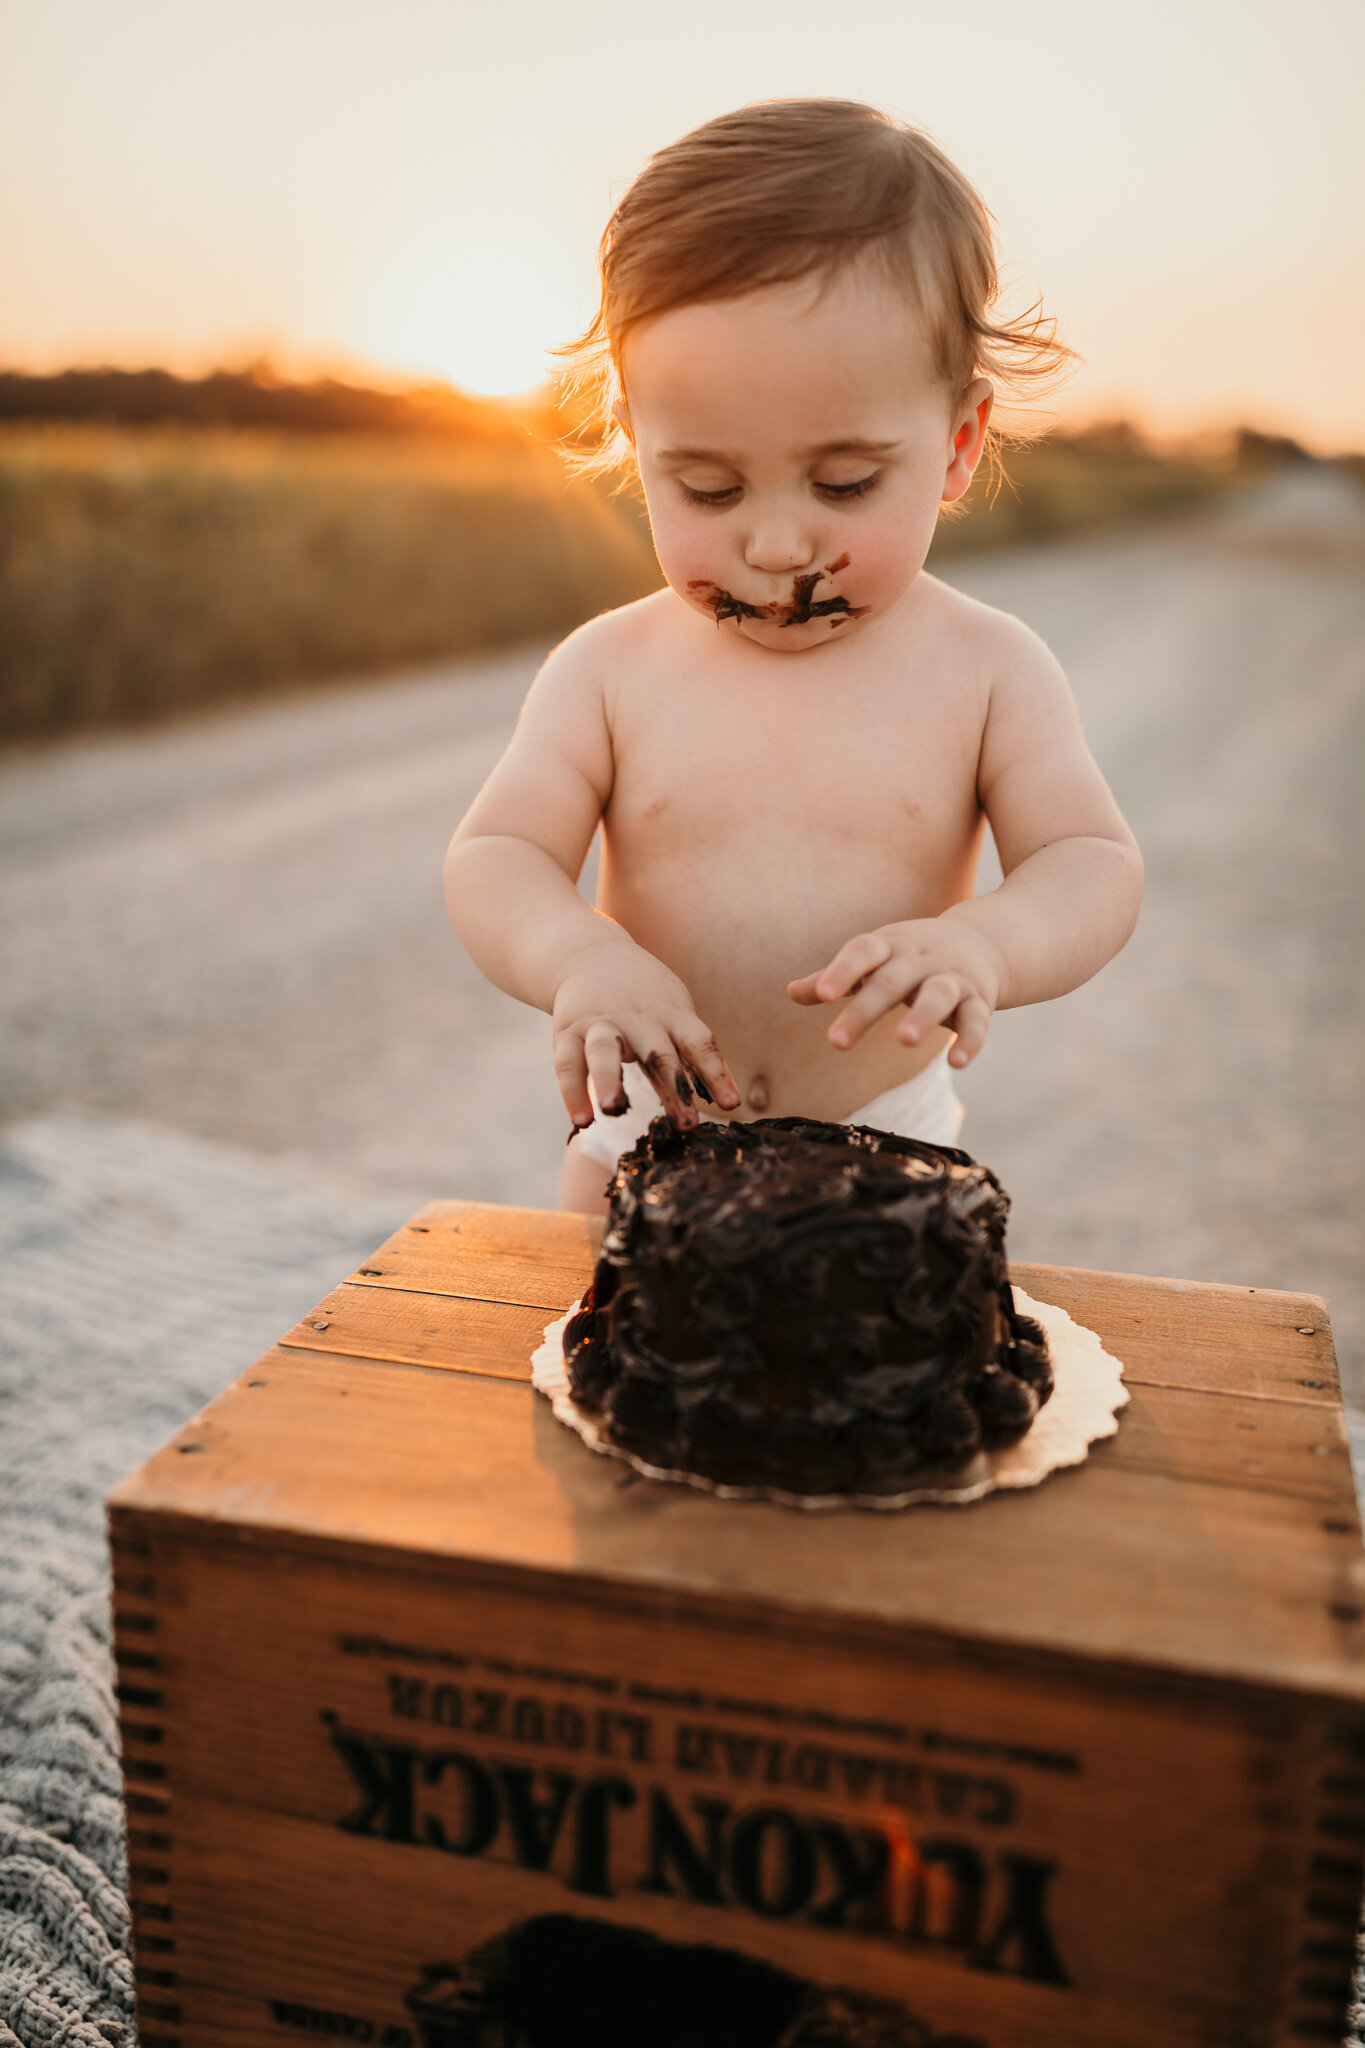 outdoor birthday cake smash session one year old